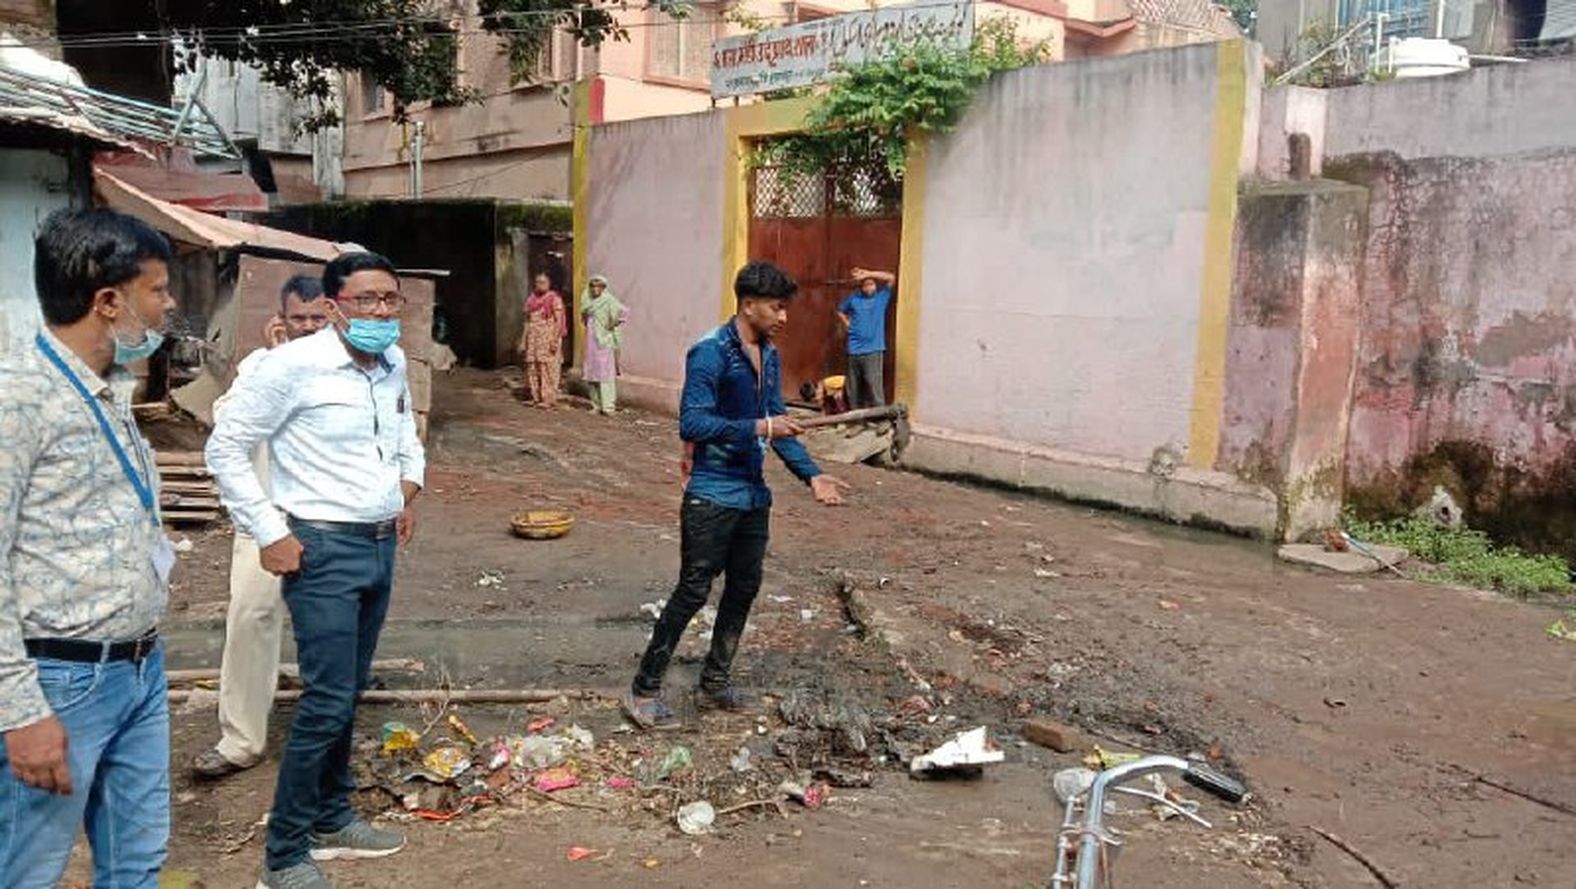 Officers ran to inspect the schools, cleaned the garbage in front of the gate